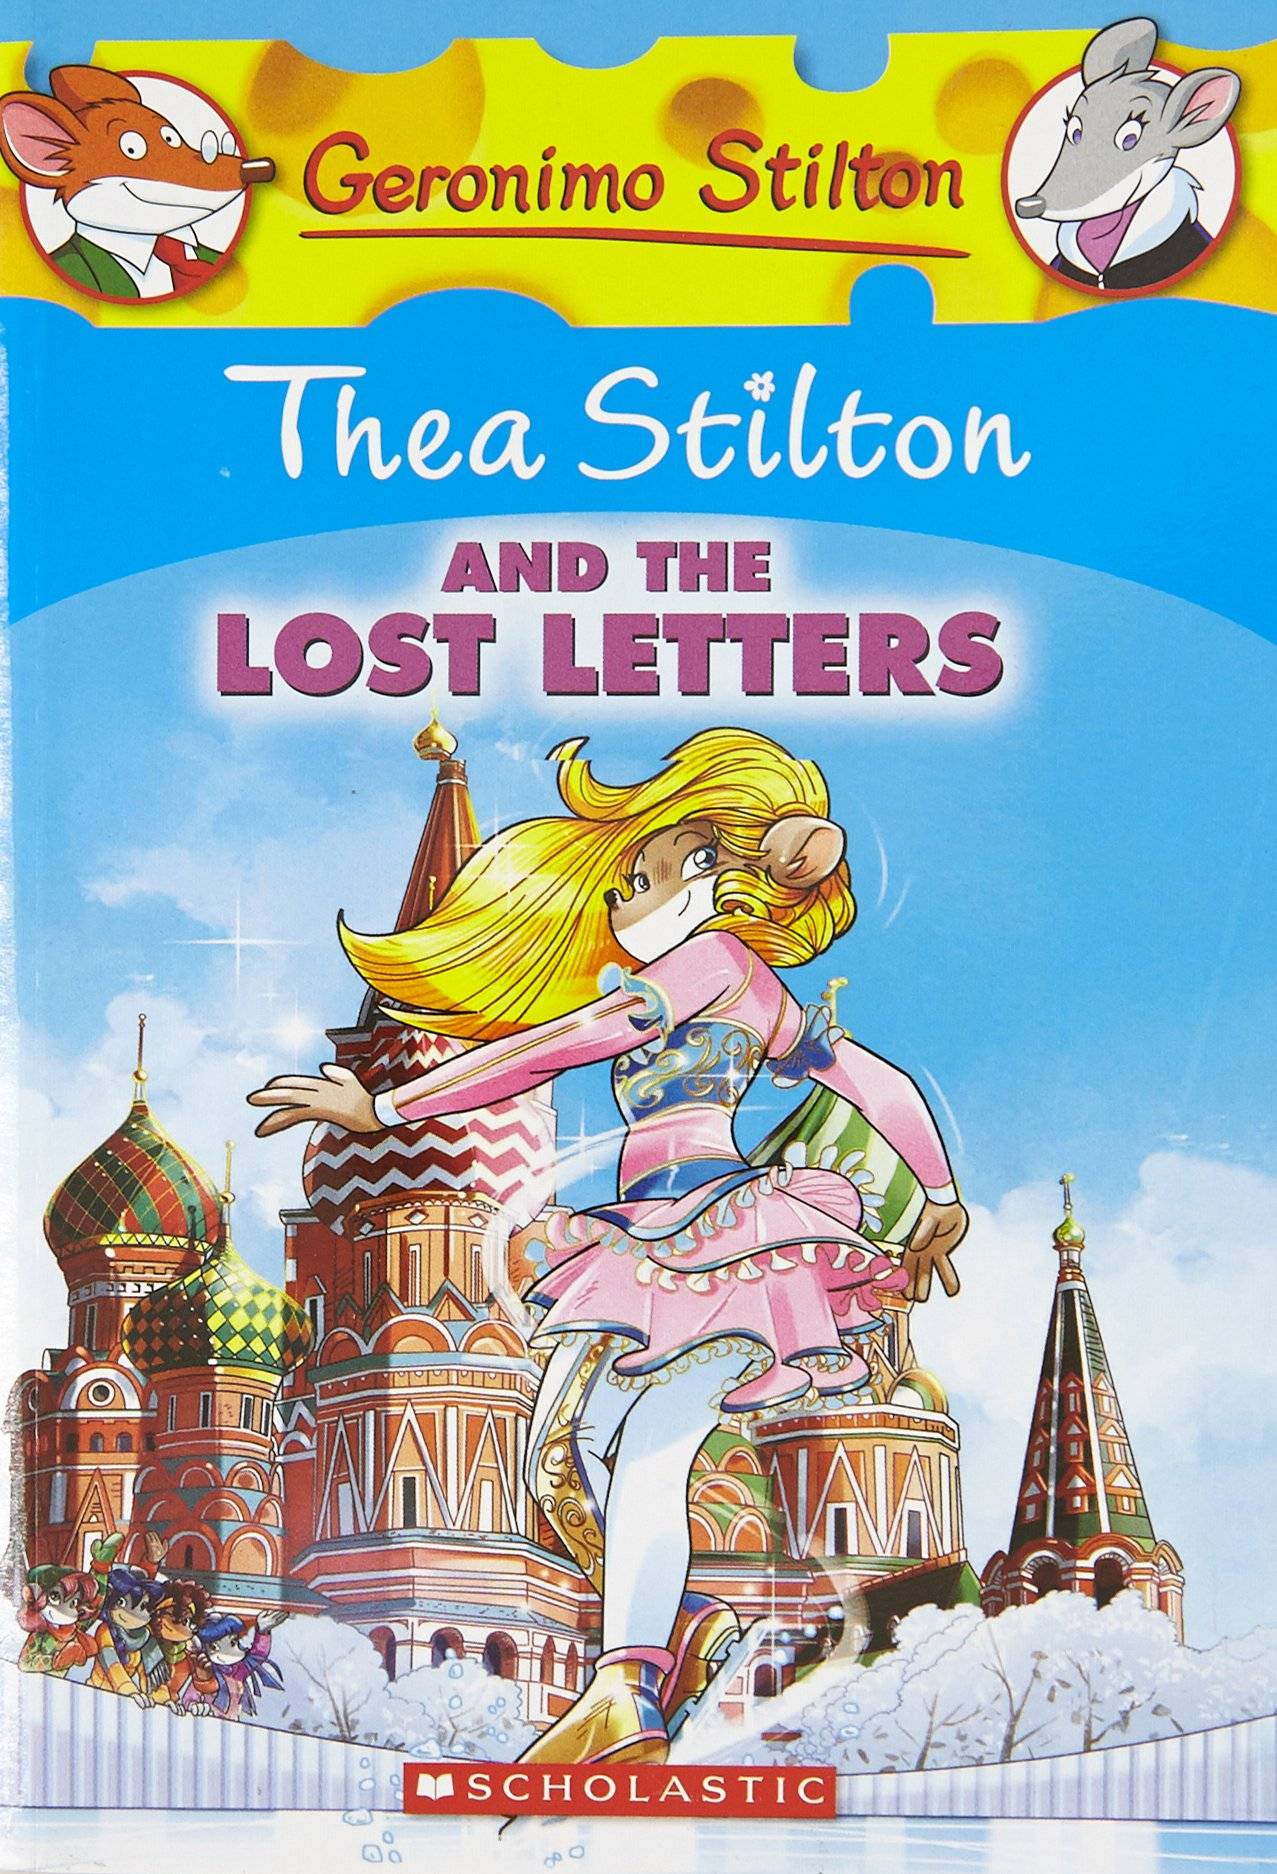 IMG : G.Stilton Thea Stilton and the lost letters